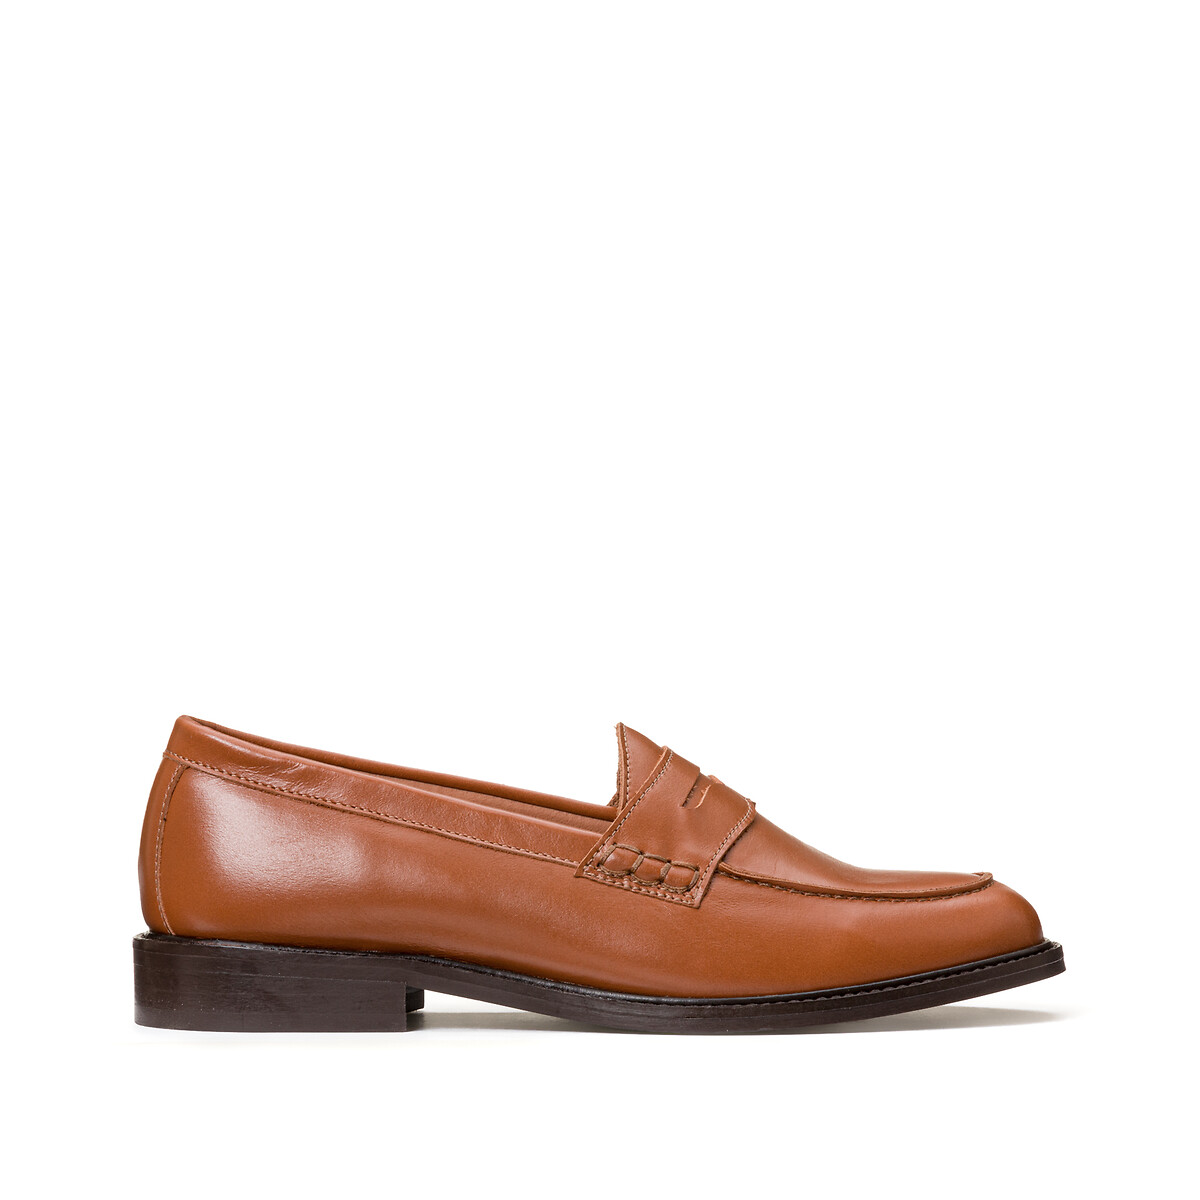 Leather loafers camel La Redoute Collections | La Redoute